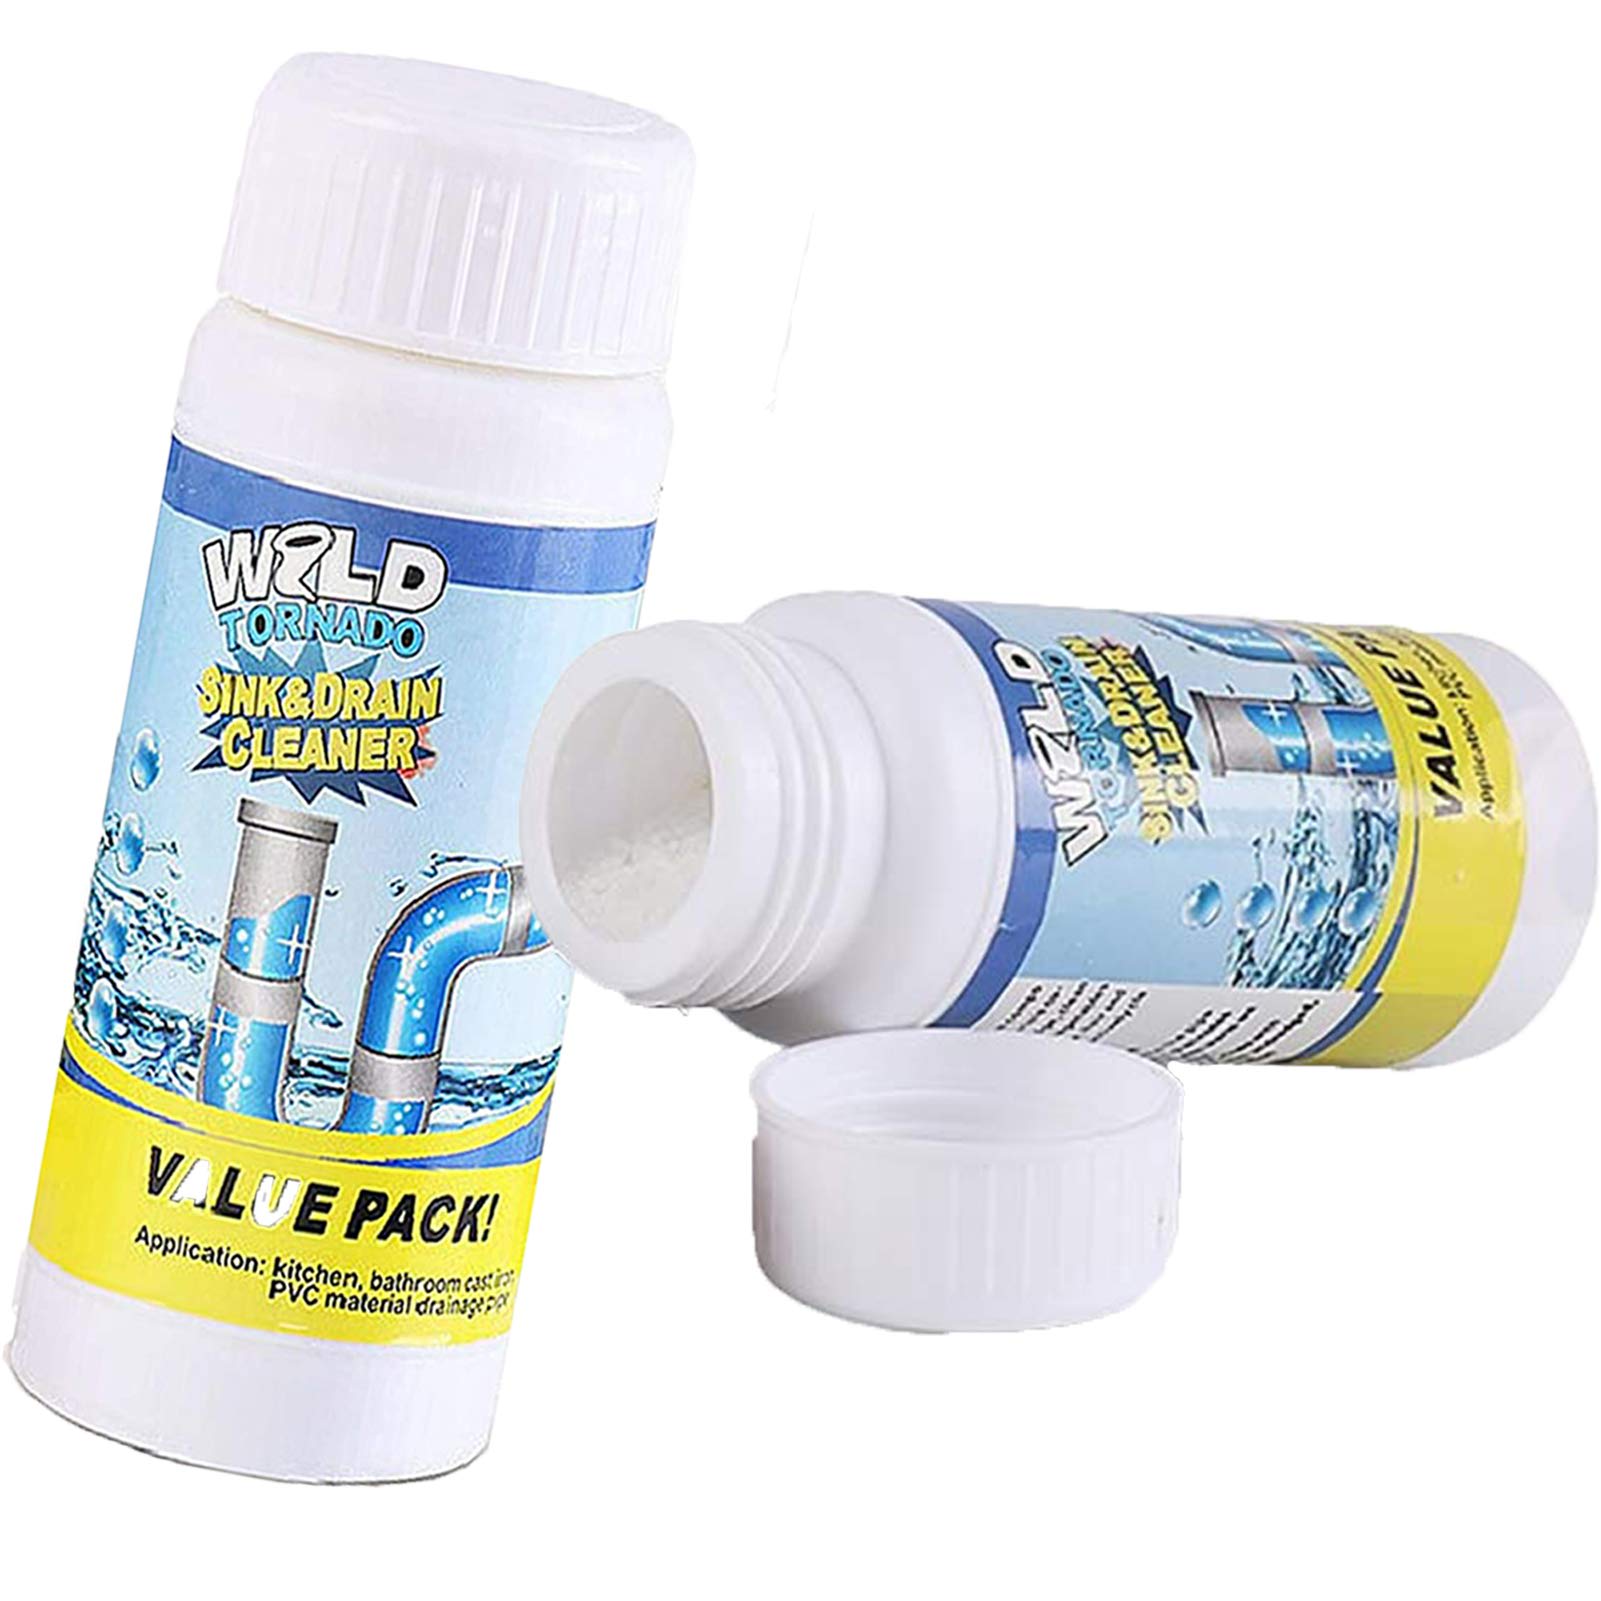 World Tornado Sink and Drain Cleaner_1